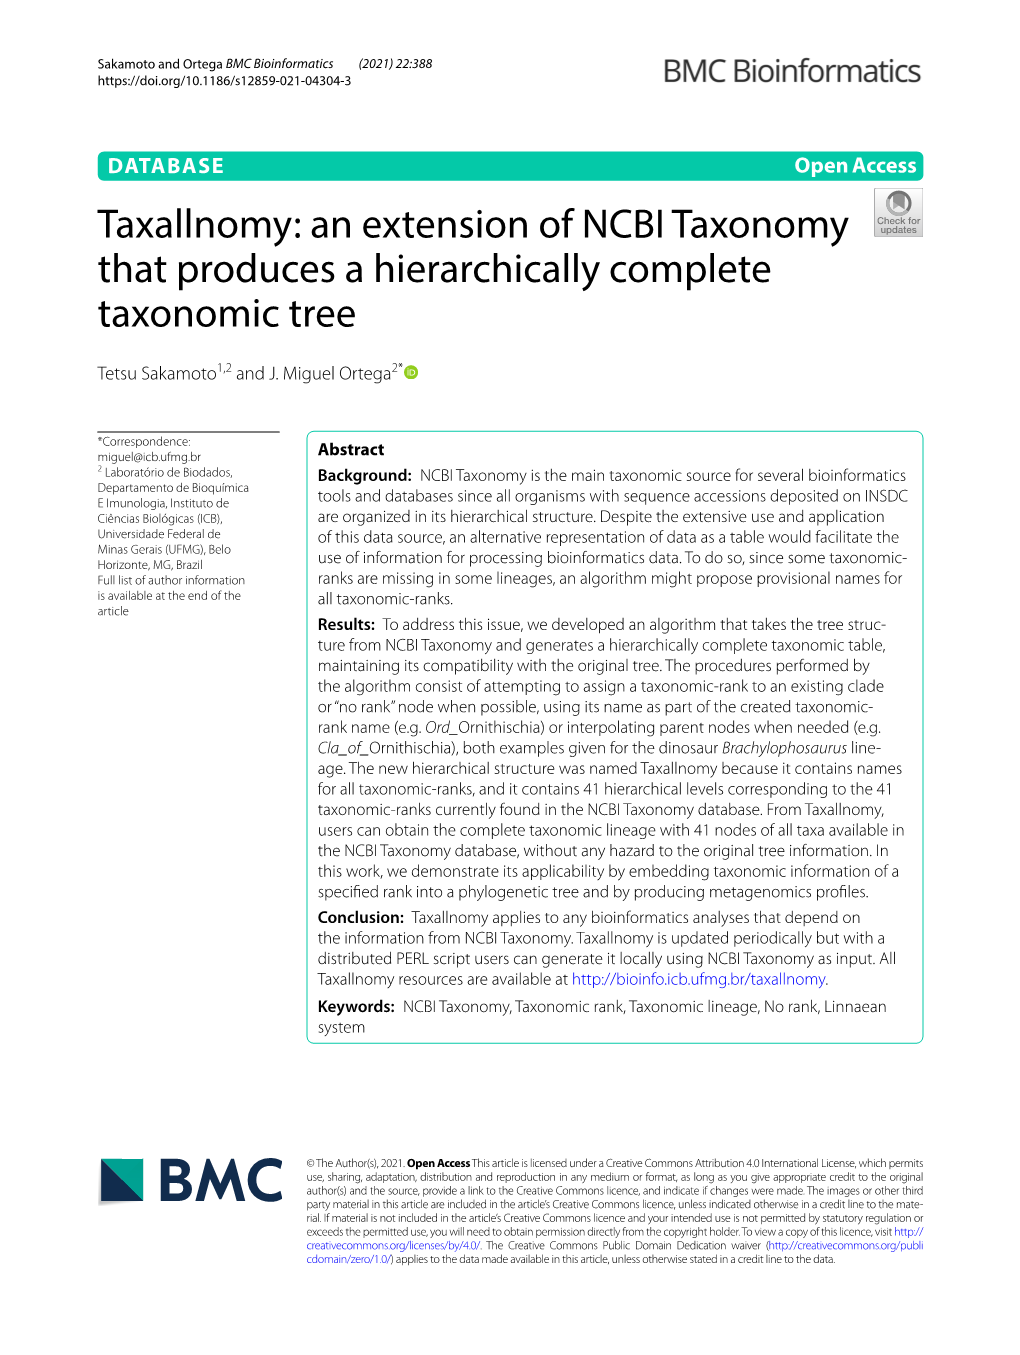 Taxallnomy: an Extension of NCBI Taxonomy That Produces a Hierarchically Complete Taxonomic Tree